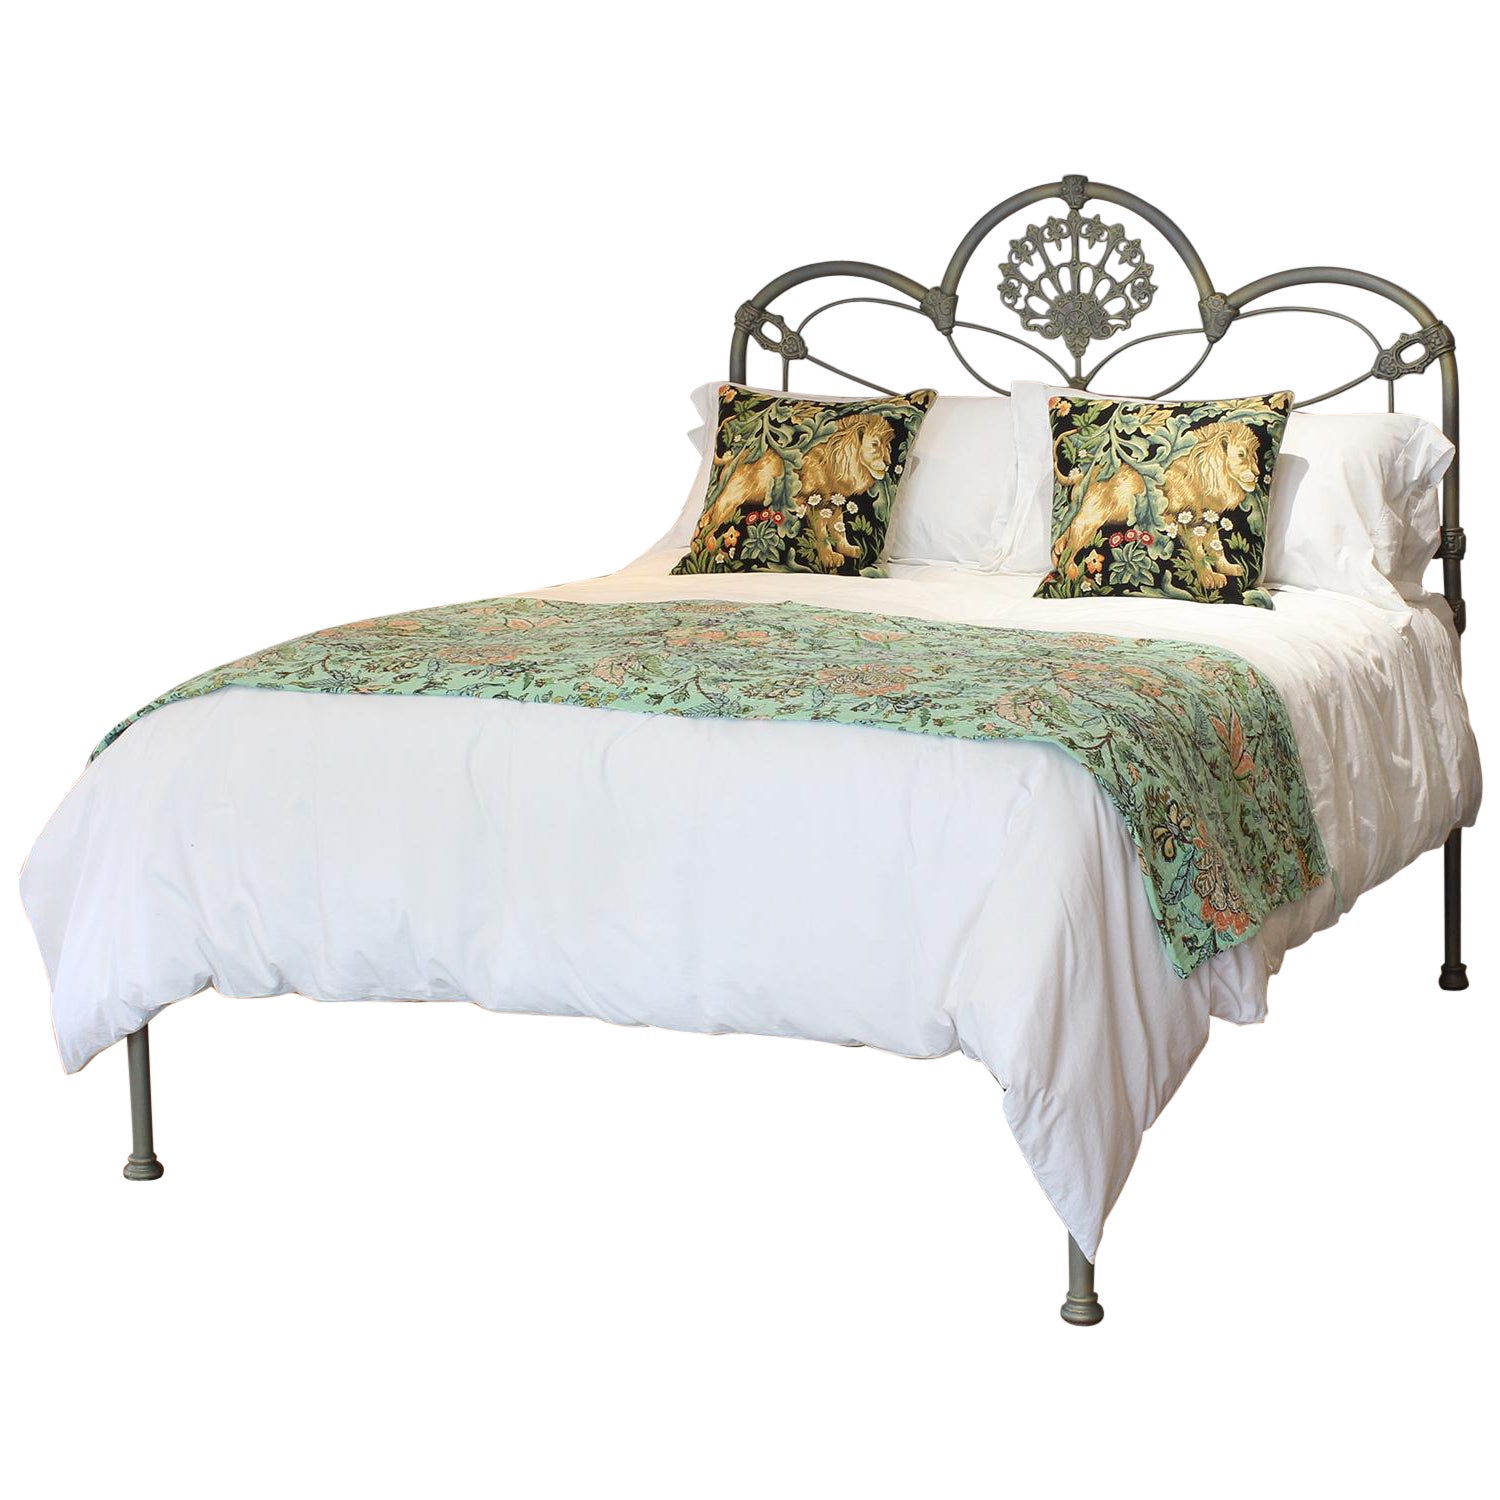 Platform Antique Cast Iron Bed in Grey and Gold, MK286